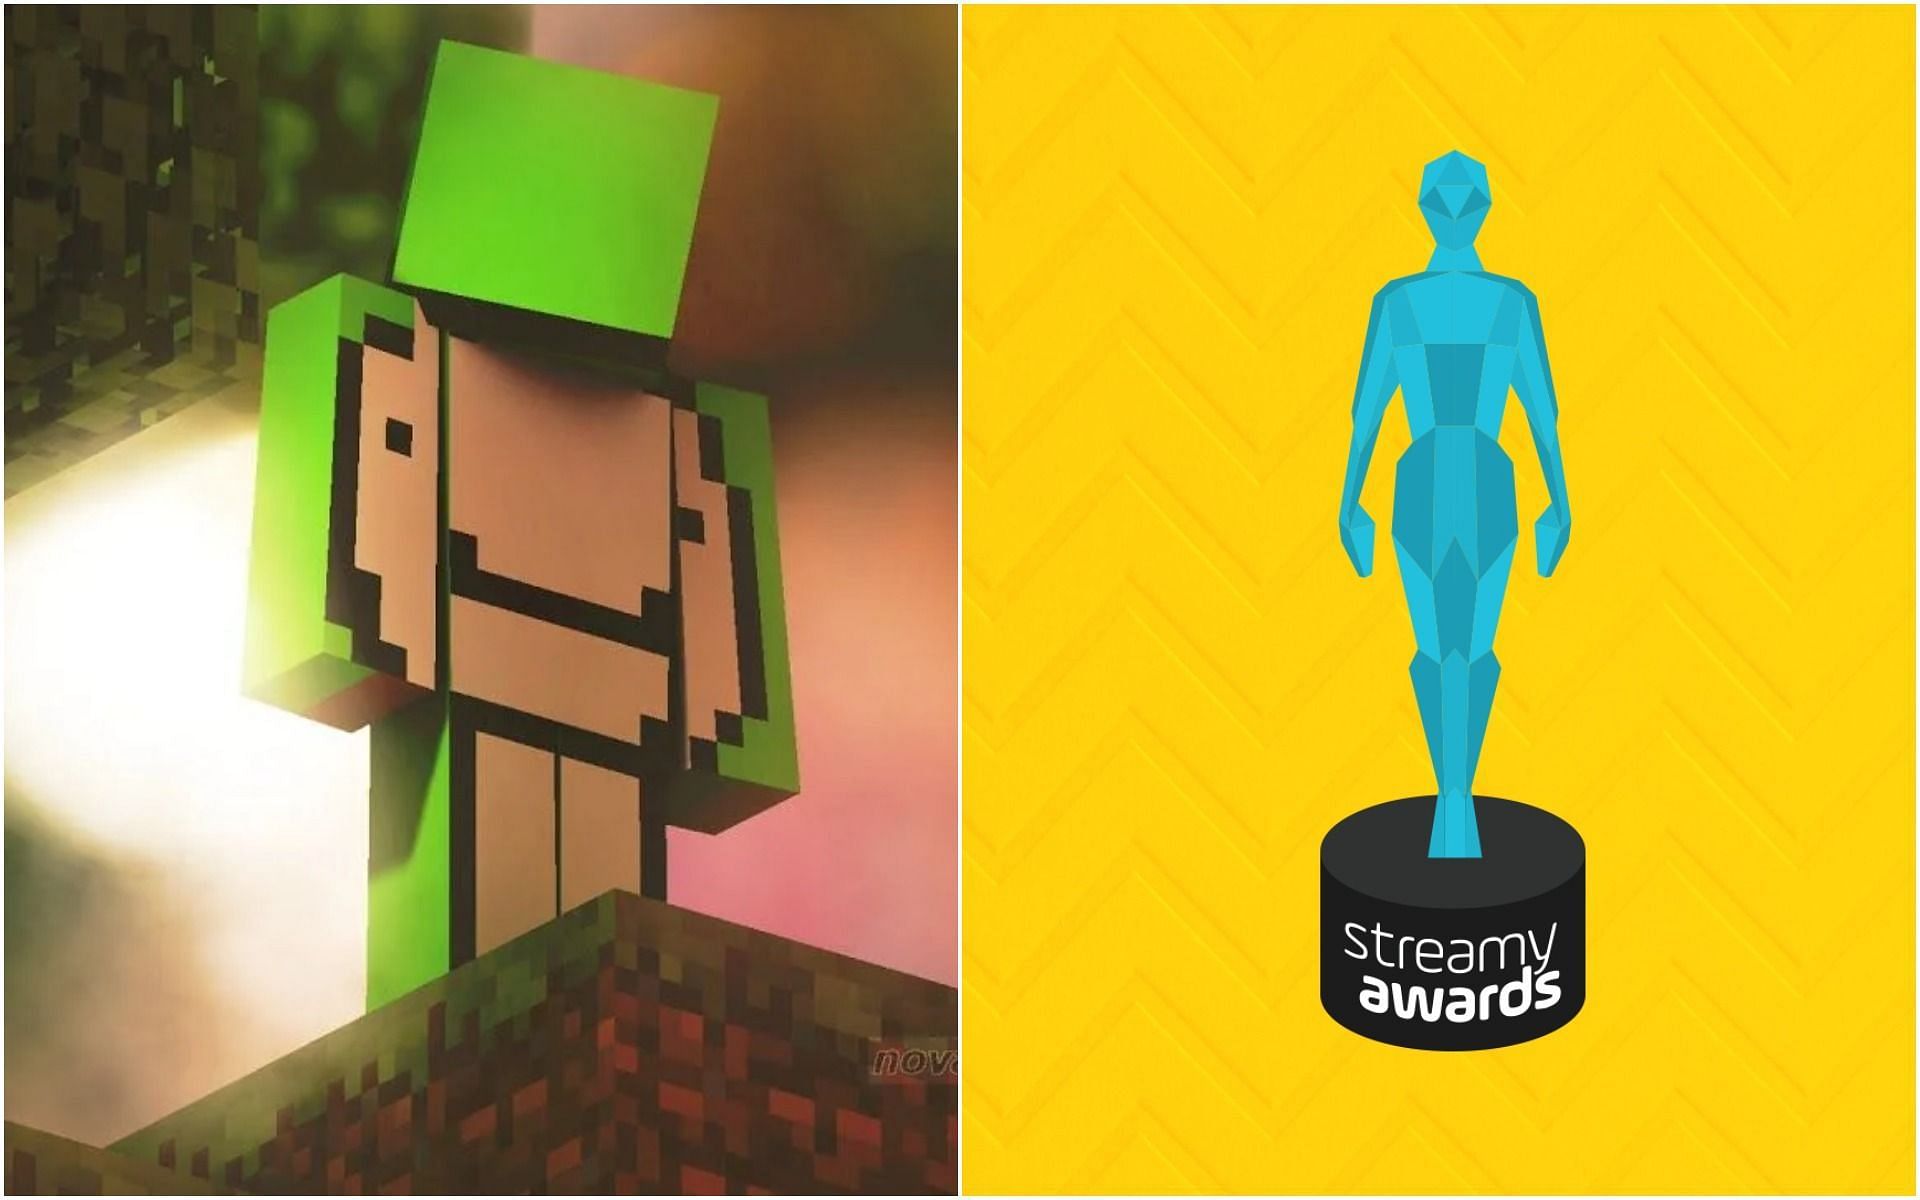 Dream nominated for YouTube Streamy Awards 2021 Gaming category (Images via Dream and Streamys)